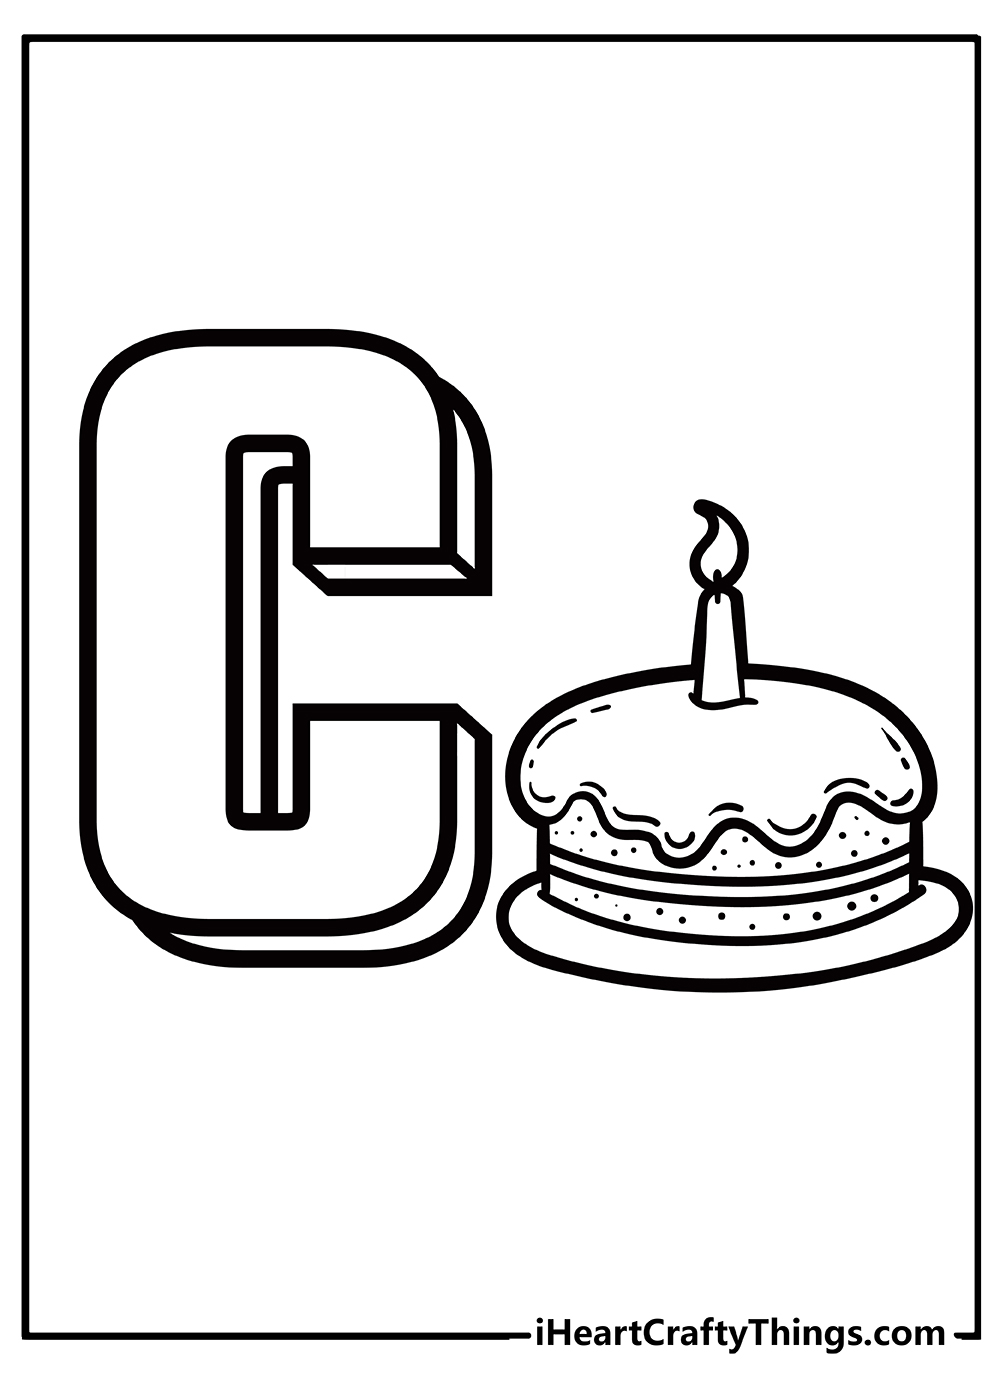 Letter C Coloring Pages for preschoolers free printable